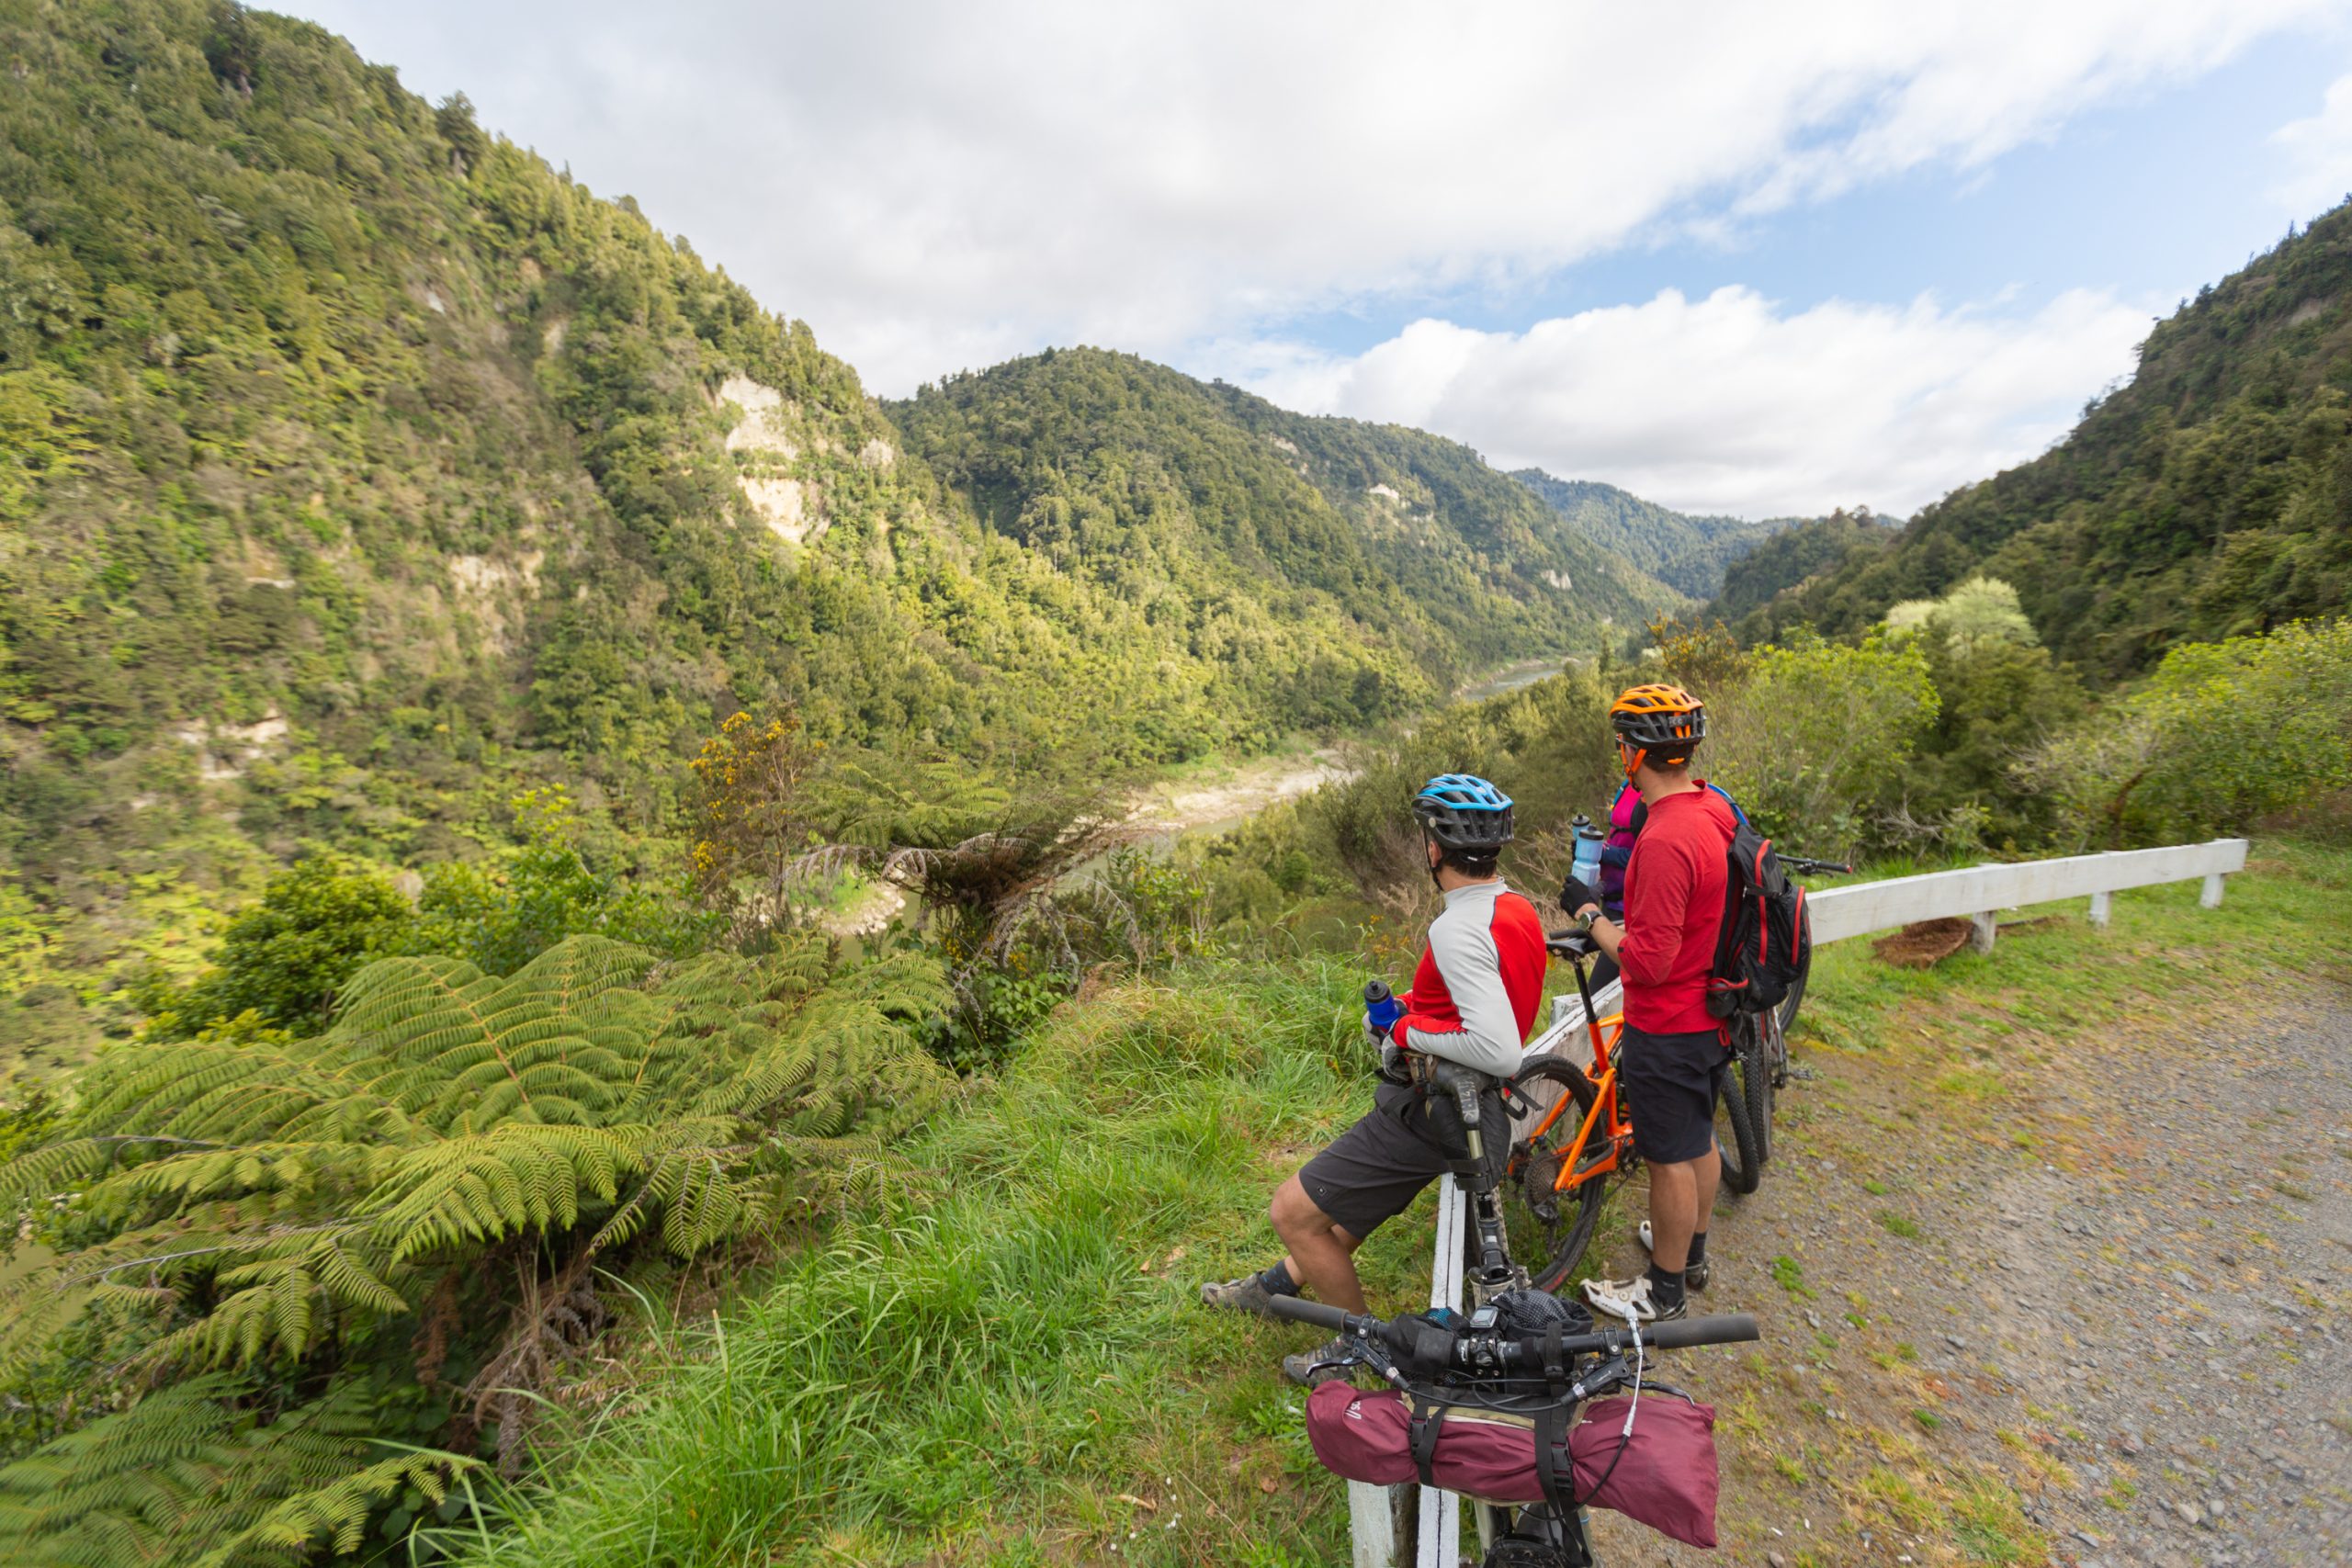 Two mountain bikers taking a break and enjoying the view of the Whanganui River valley